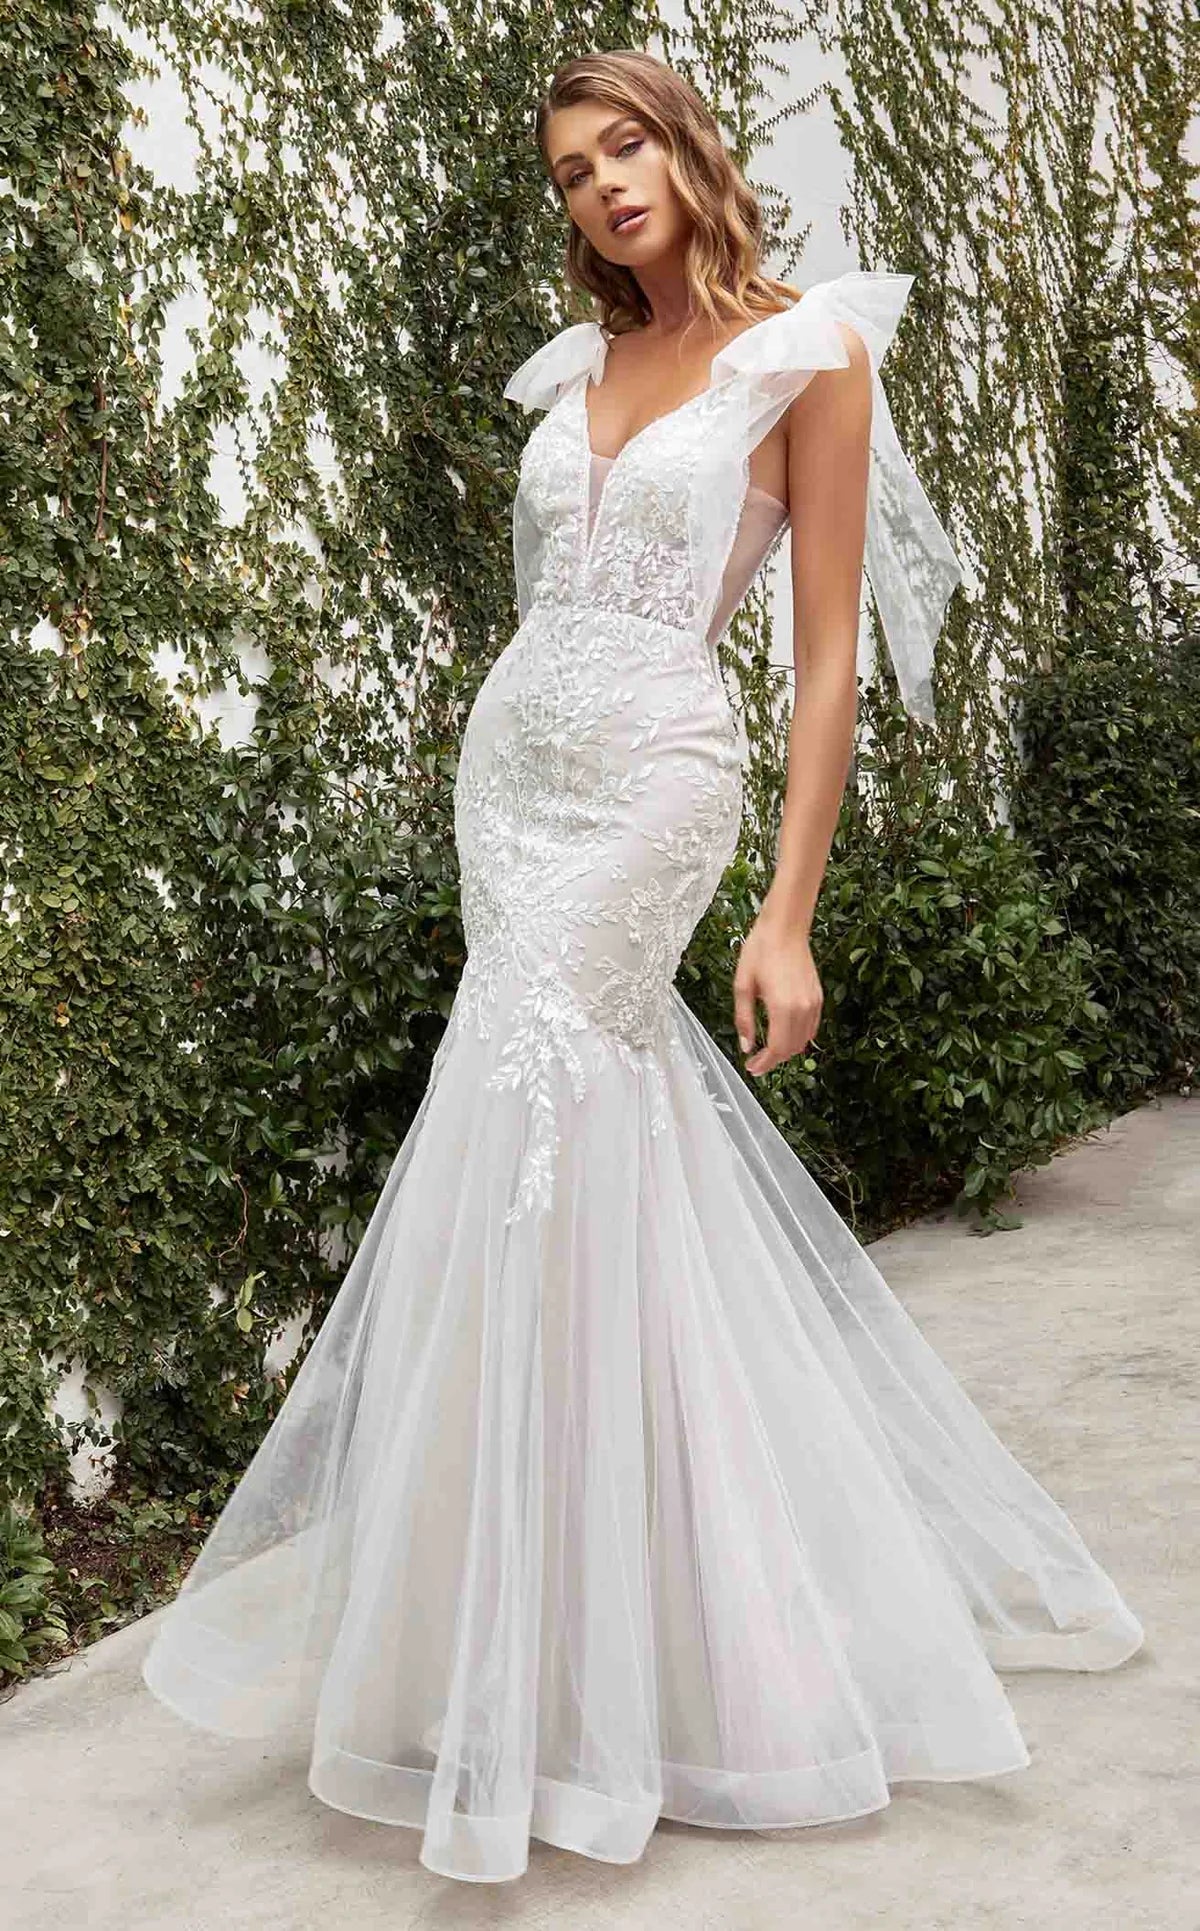 Vika Lace Sparkly Bow Sleeve Mermaid Wedding Dress: Off White - Bella and Bloom Boutique